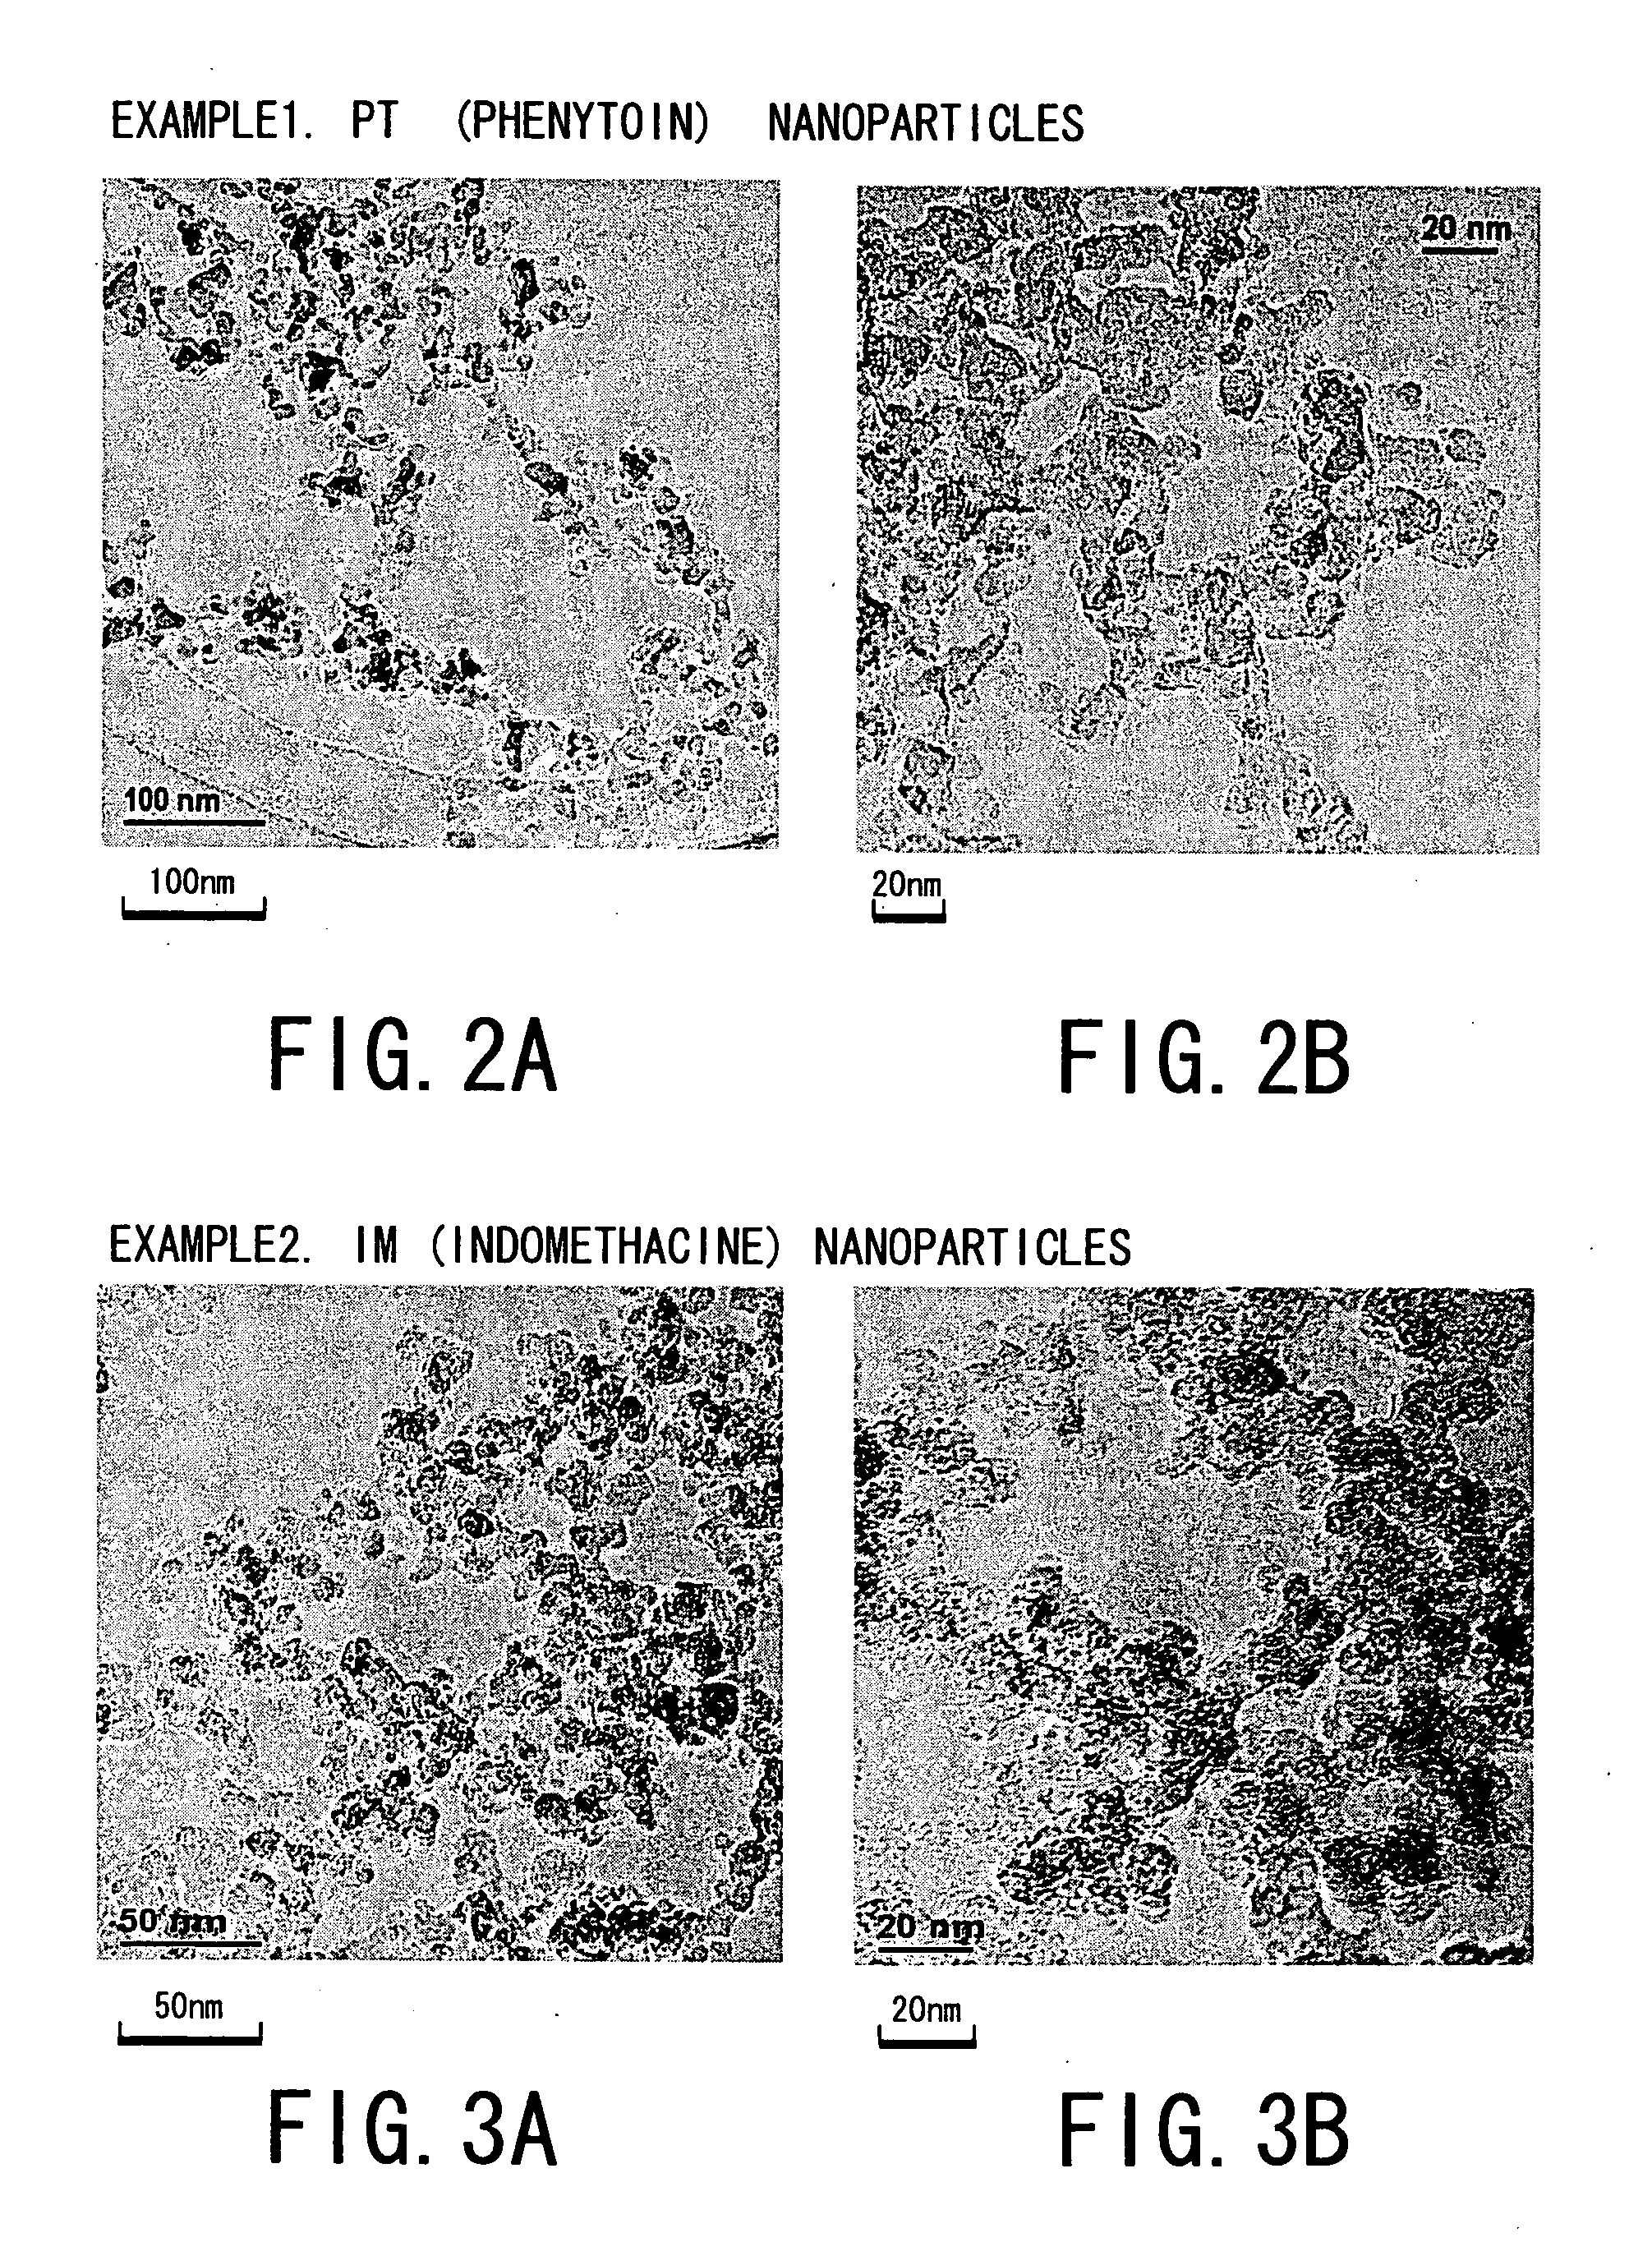 Drug nano-particle, method and apparatus for preparing pharmaceutical preparation using the particle